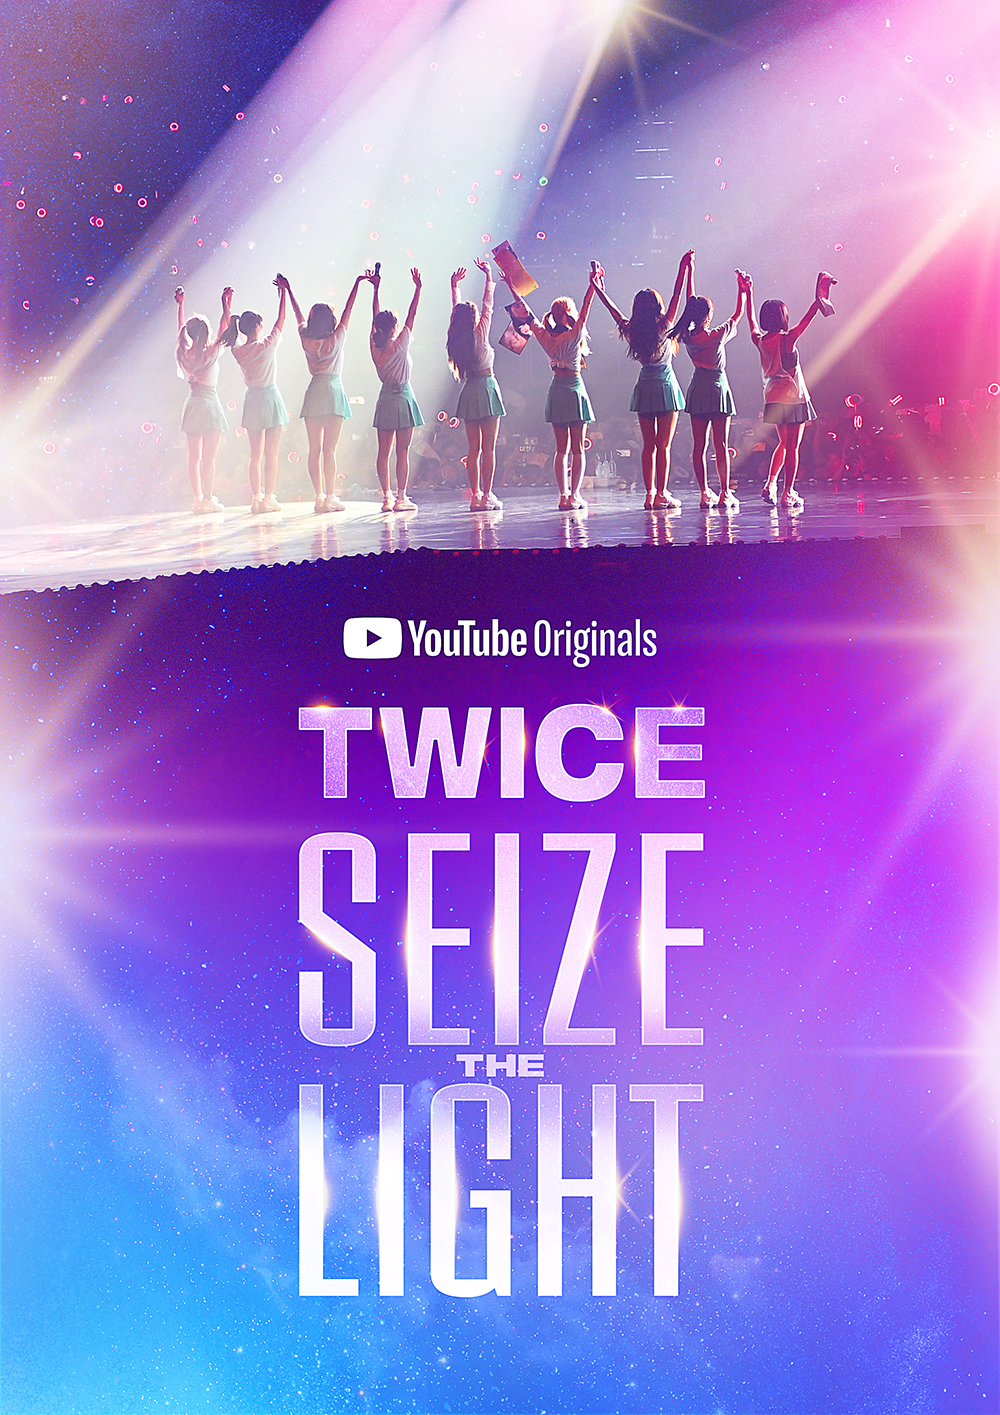 Herald Review] Twice's 'Seize the Lights' shows girl group